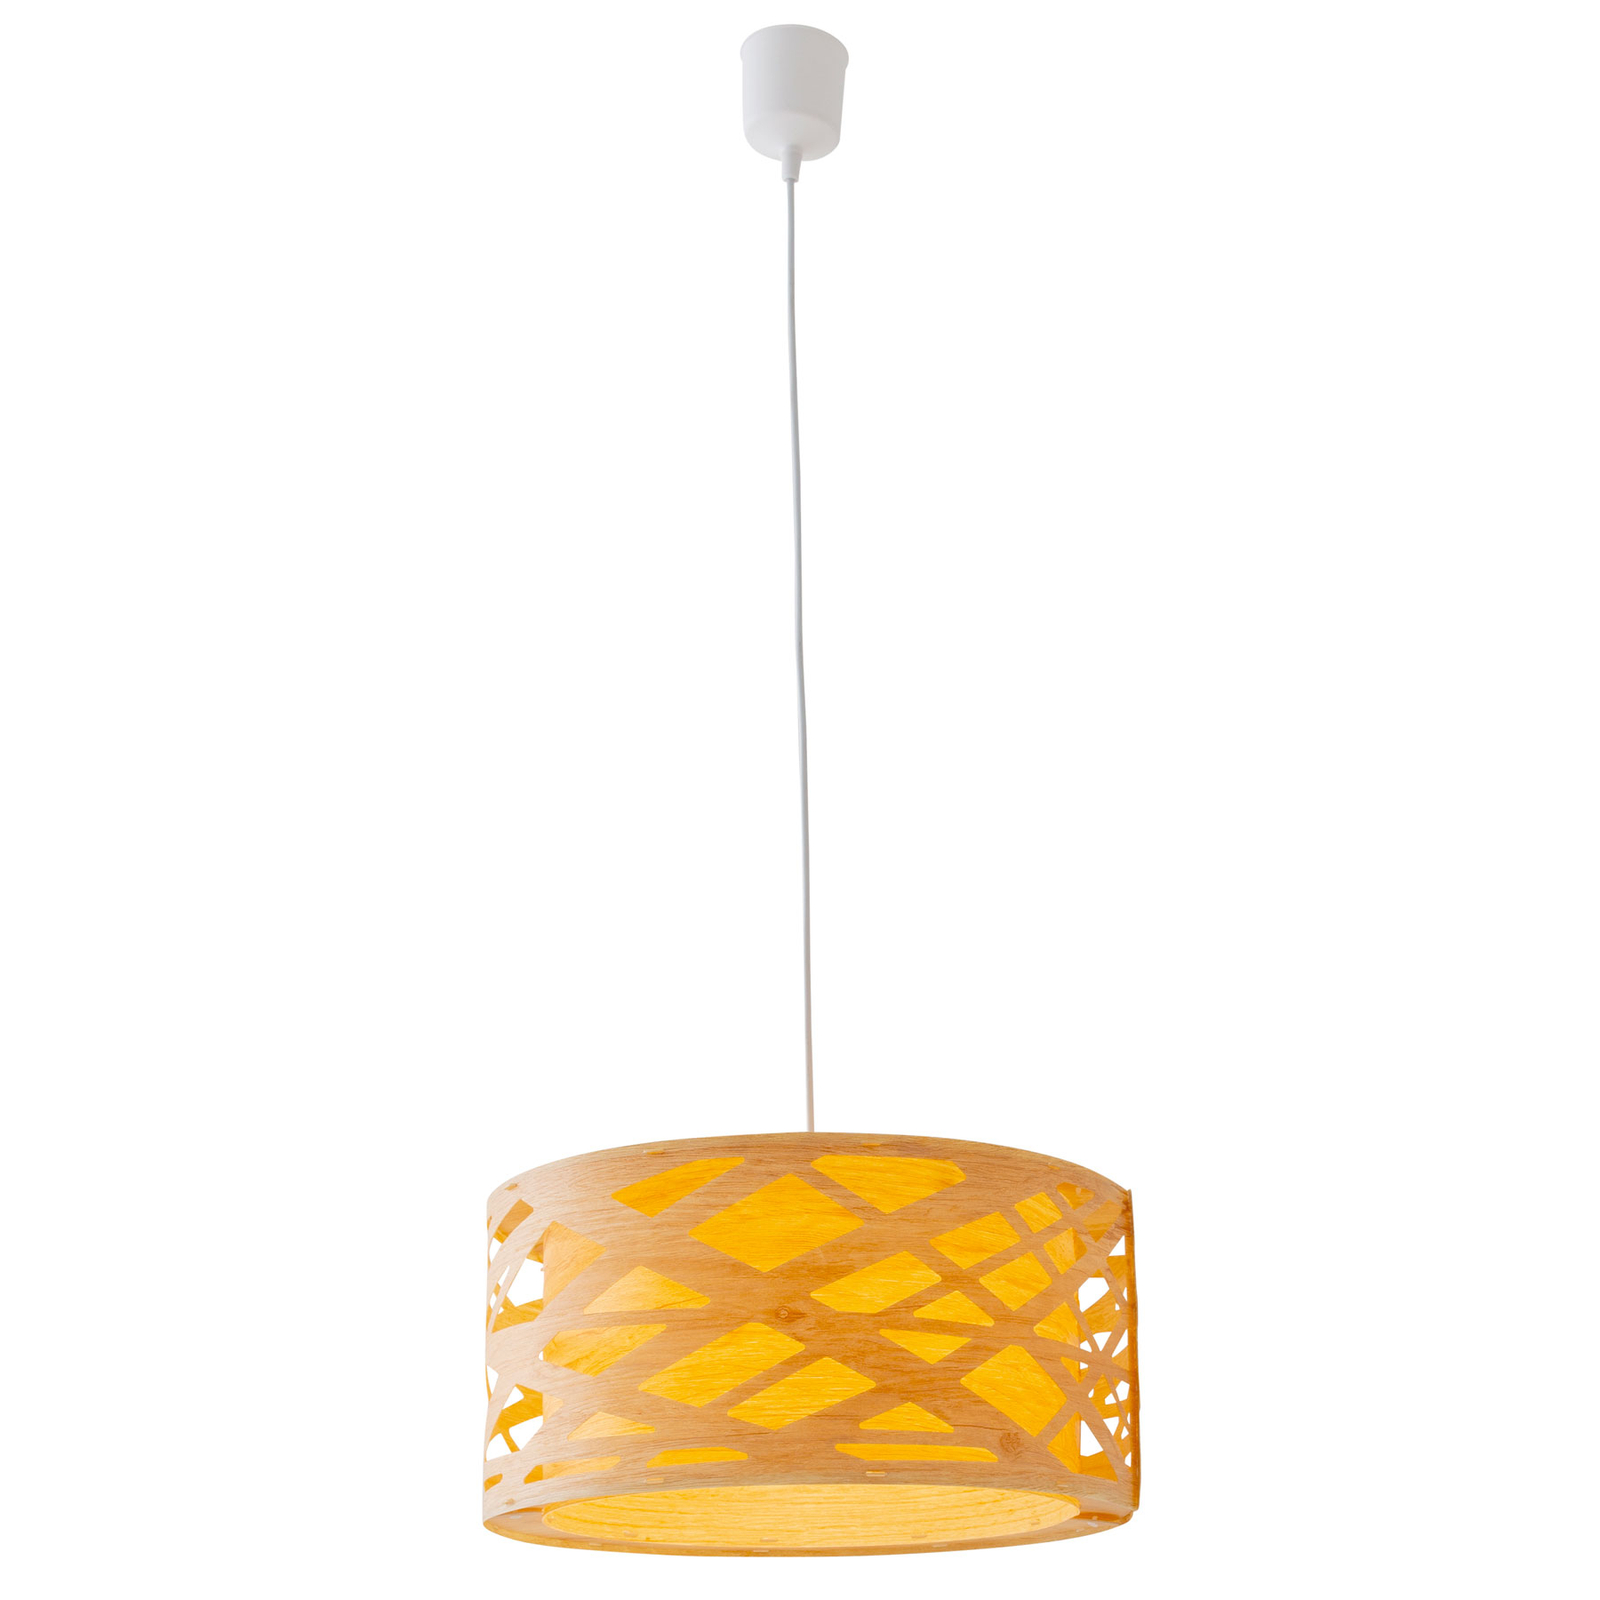 Finja hanging light, lampshade in a bamboo look